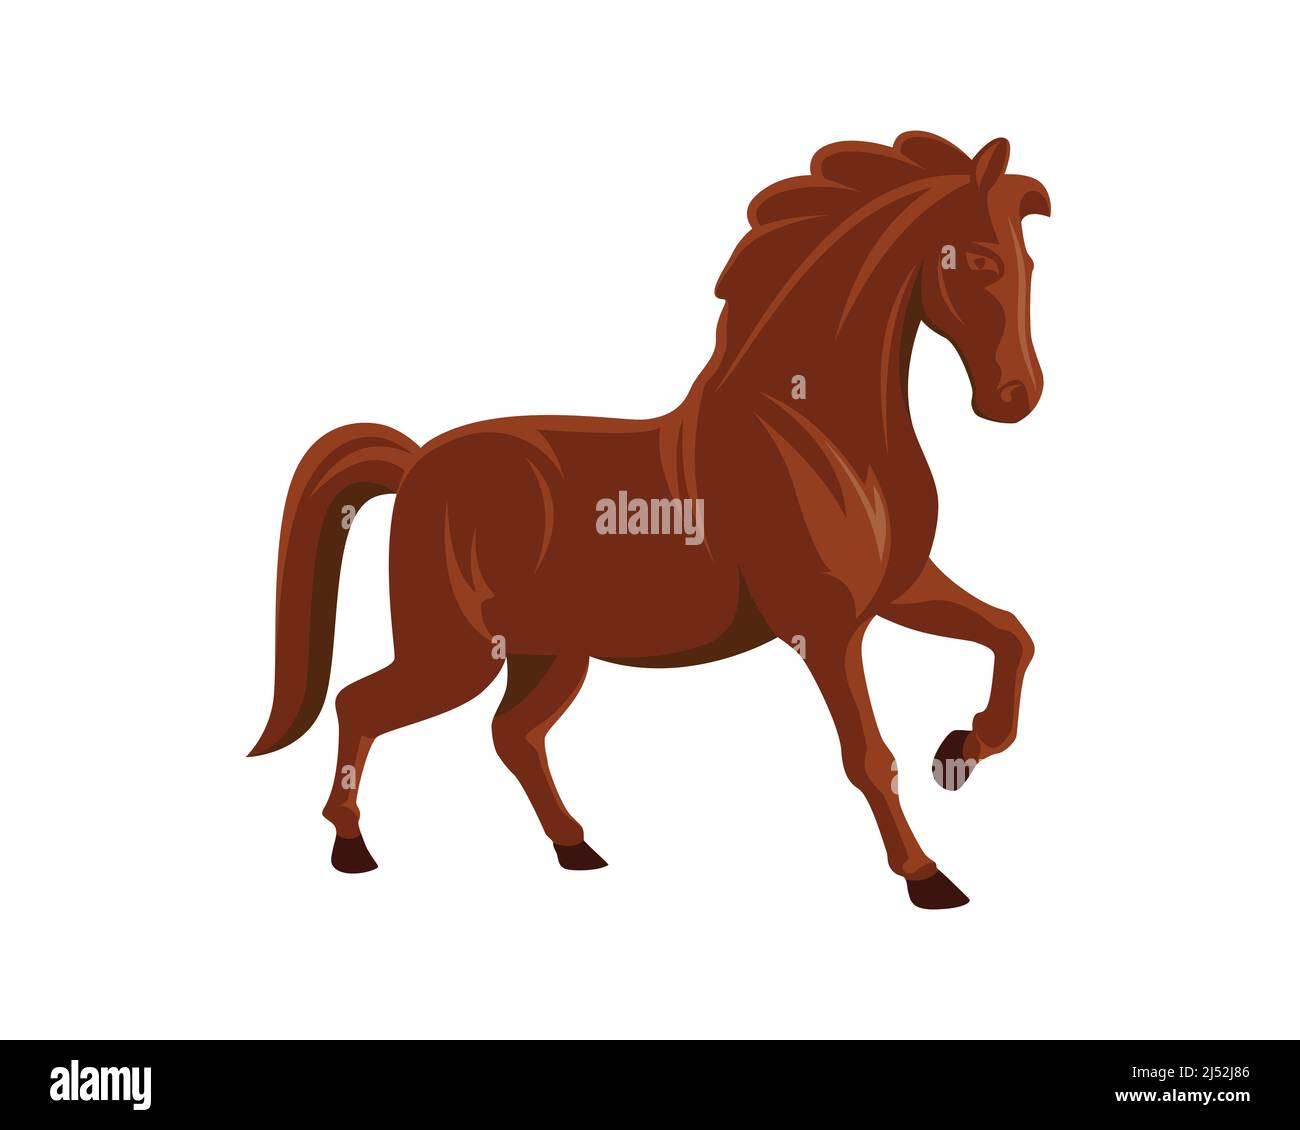 A Horse with Steady Gesture Illustration Vector Stock Vector